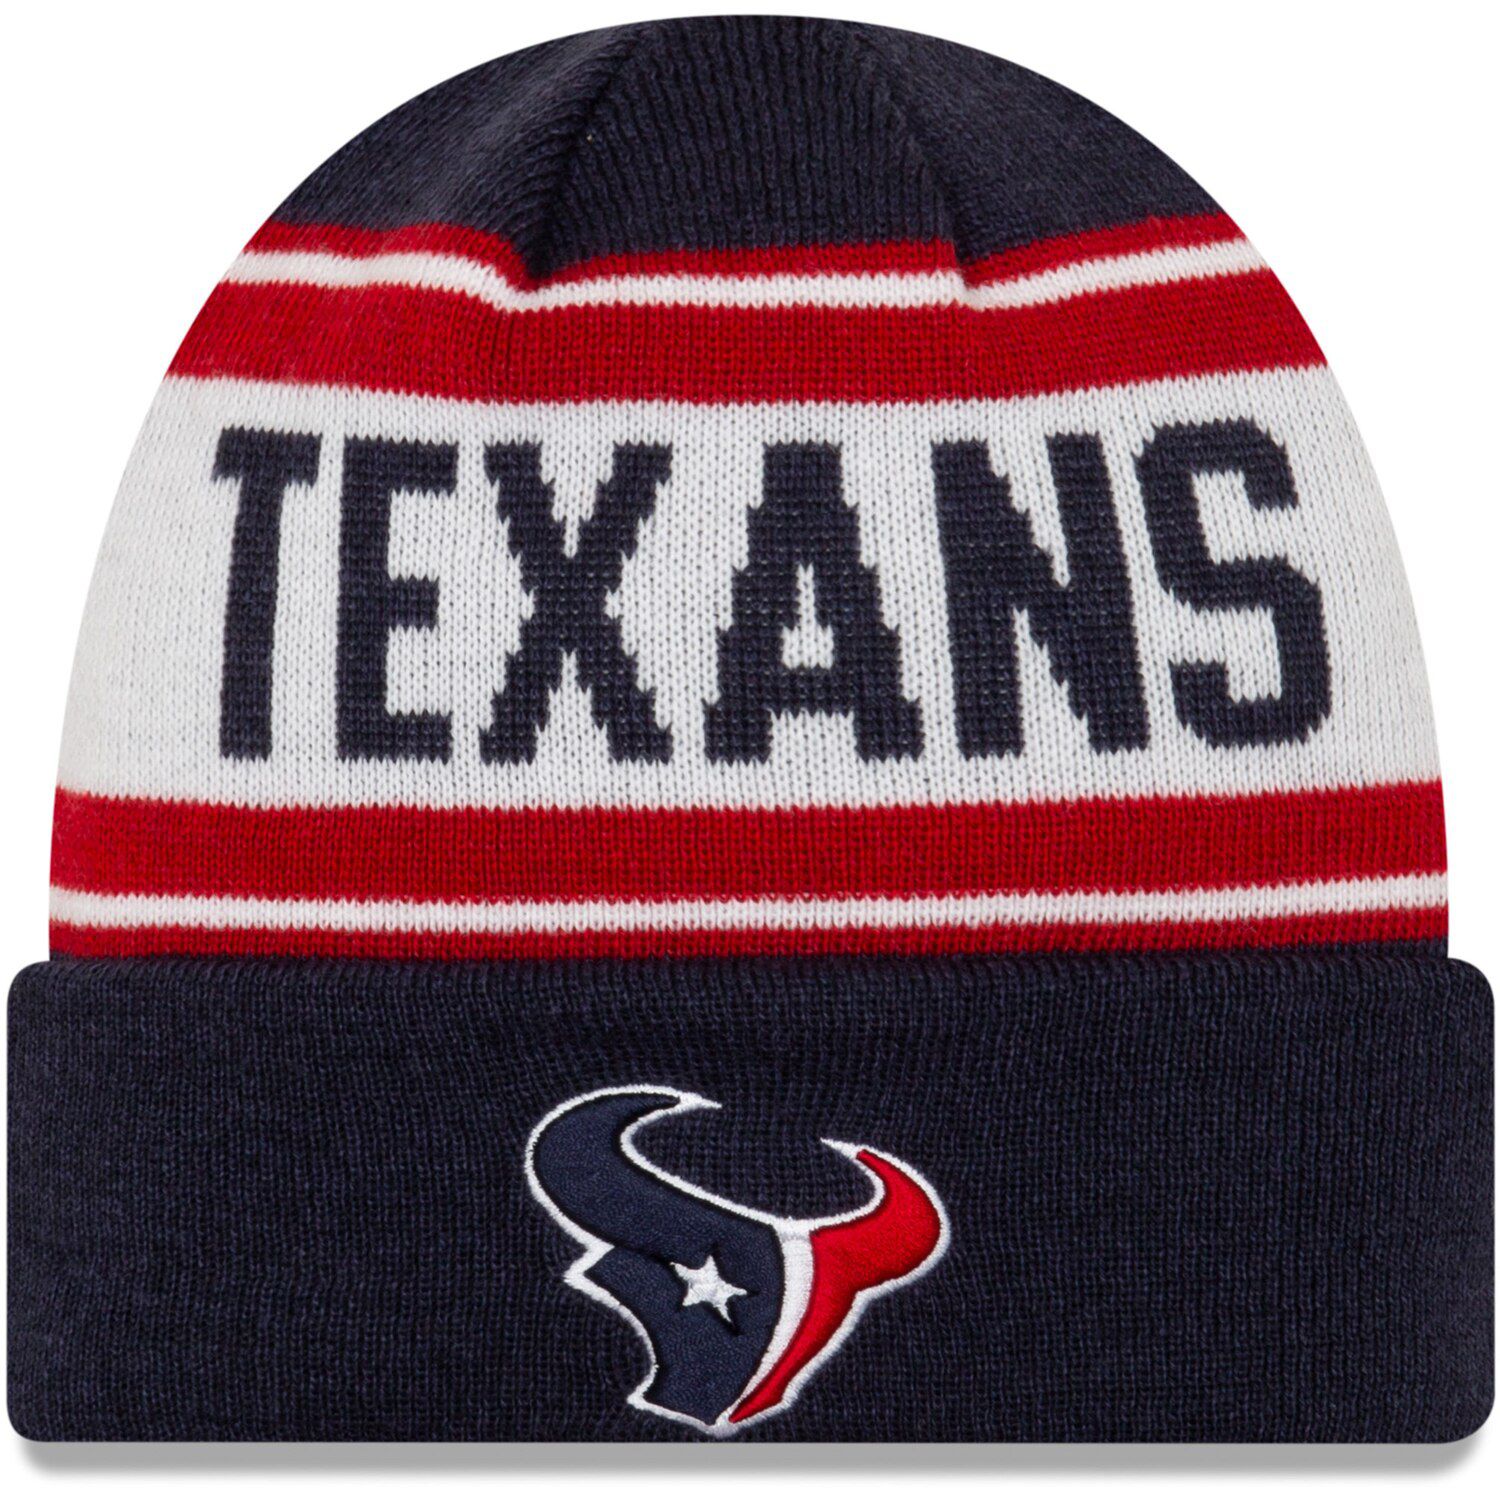 youth texans hat